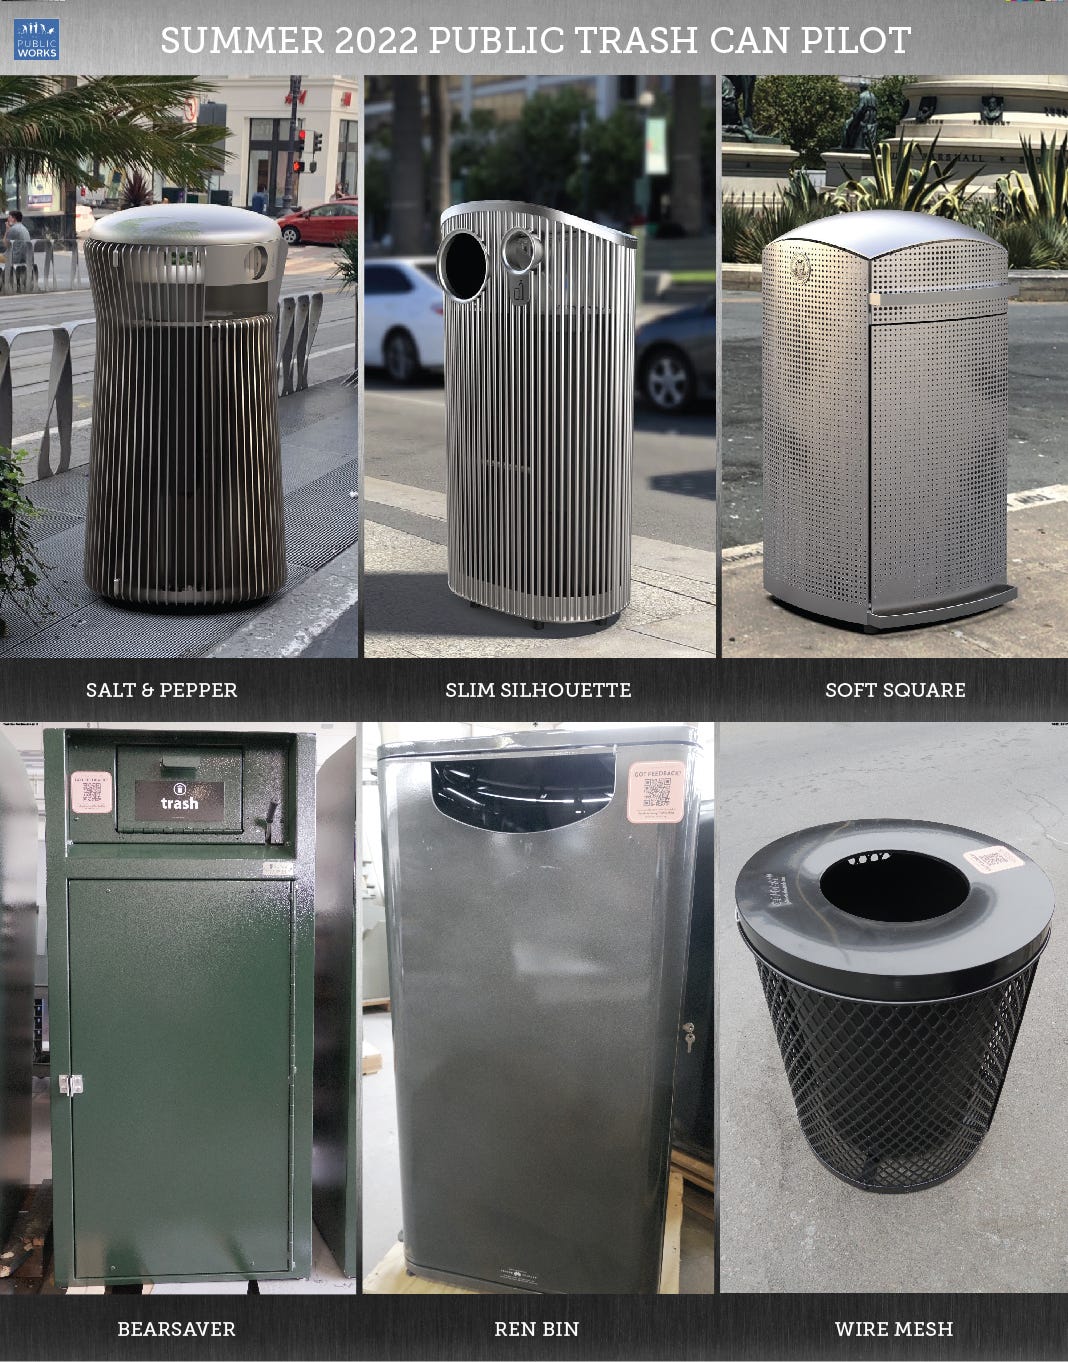 San Francisco's $20,000 trash cans - by Ali Griswold